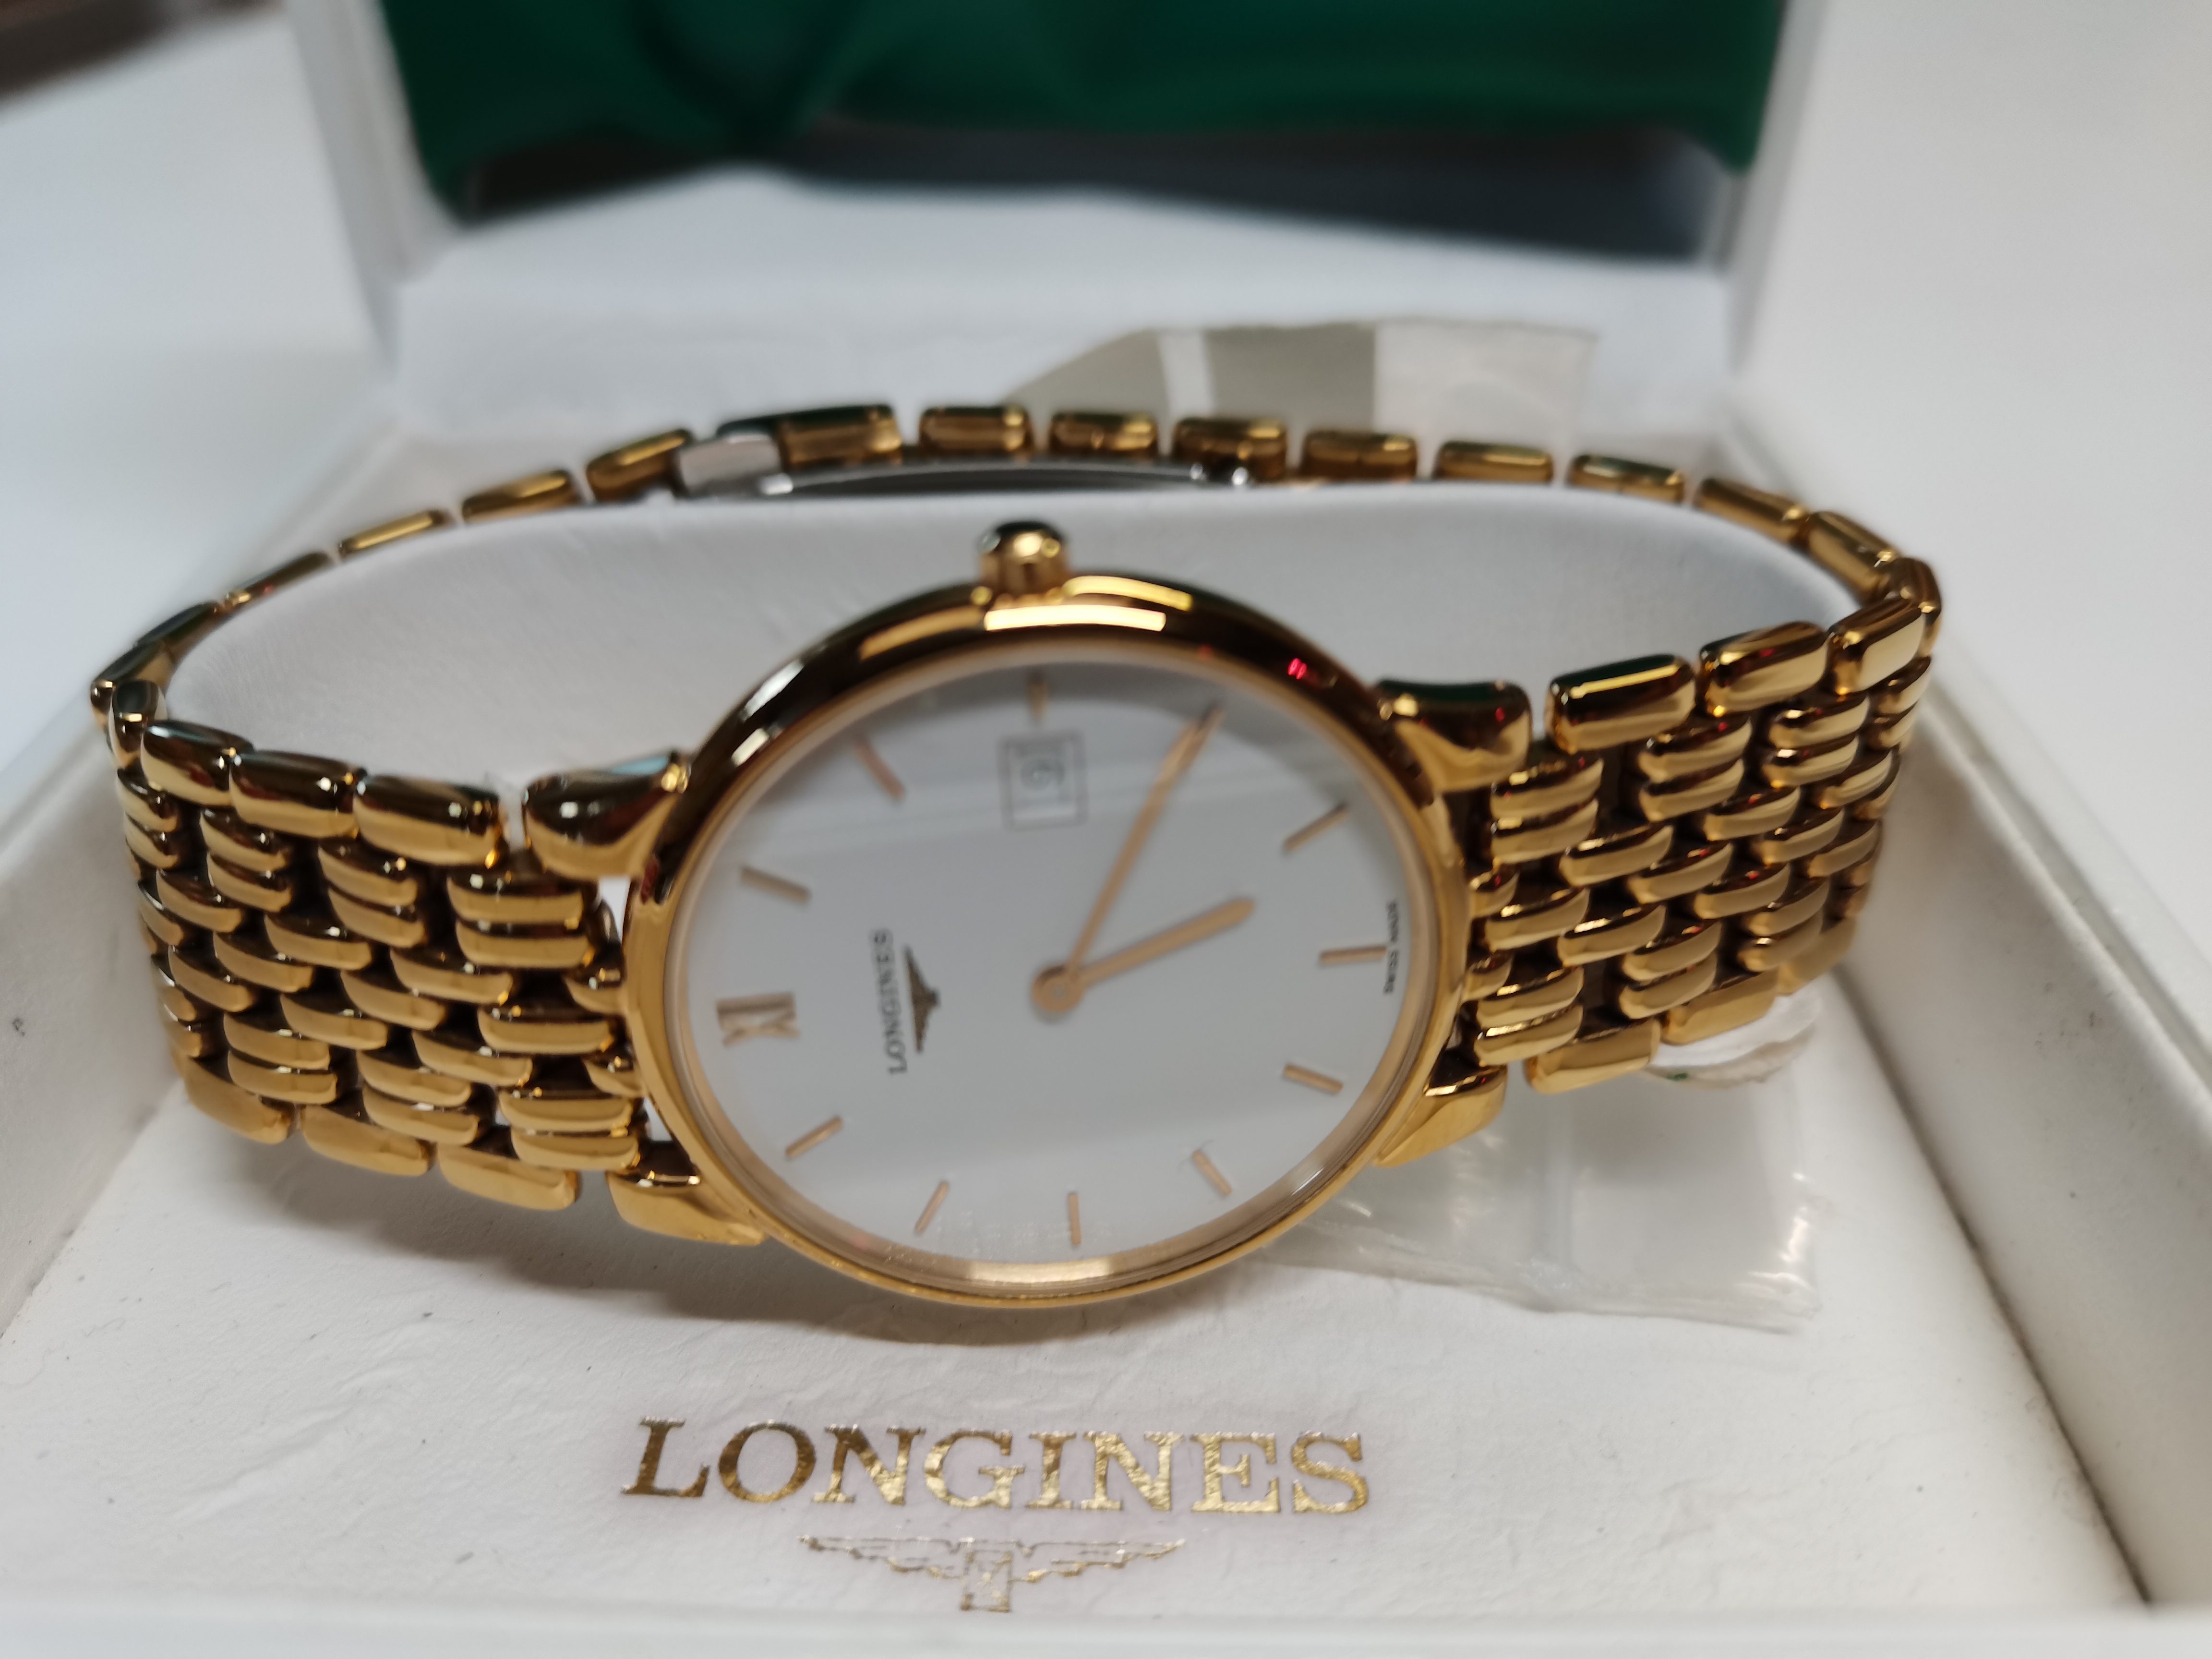 Longines gold plated gents wrist watch purchased 1999 £575 with all paperwork.